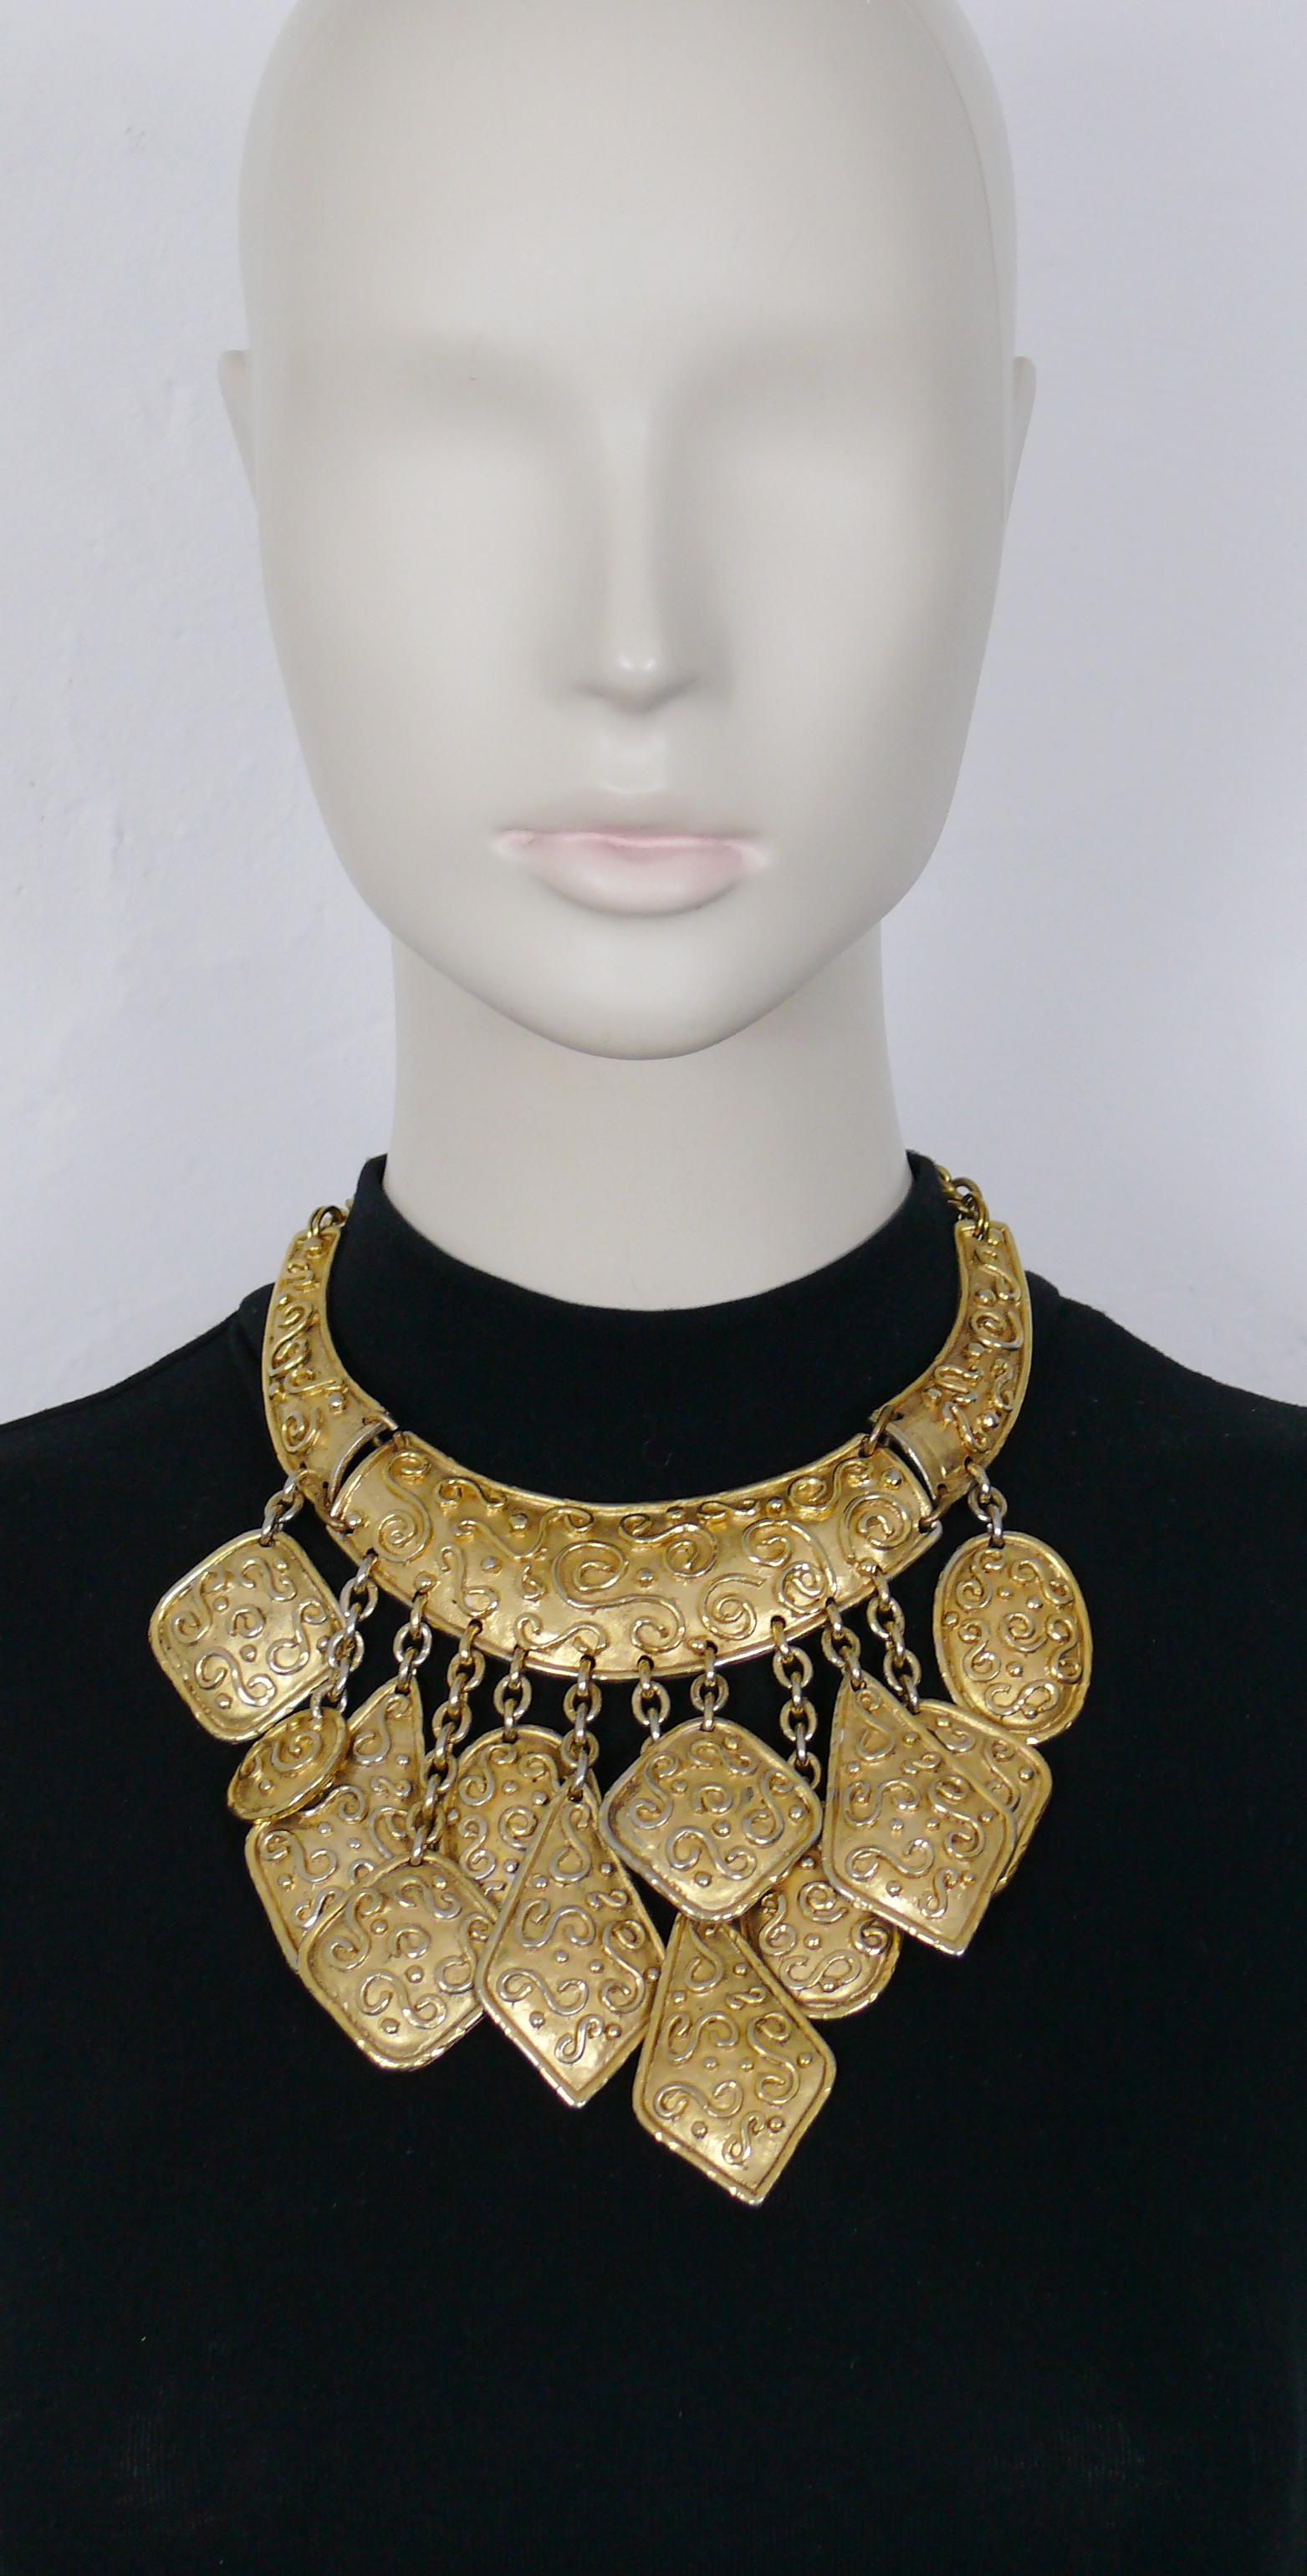 EDOUARD RAMBAUD vintage antiqued gold toned oriental inspired opulent bib necklace.

Hook clasp closure.

Marked EDOUARD RAMBAUD Paris.

Indicative measurements : length approx. 34 cm (13.39 inches) / max. width (including the central charm) approx.